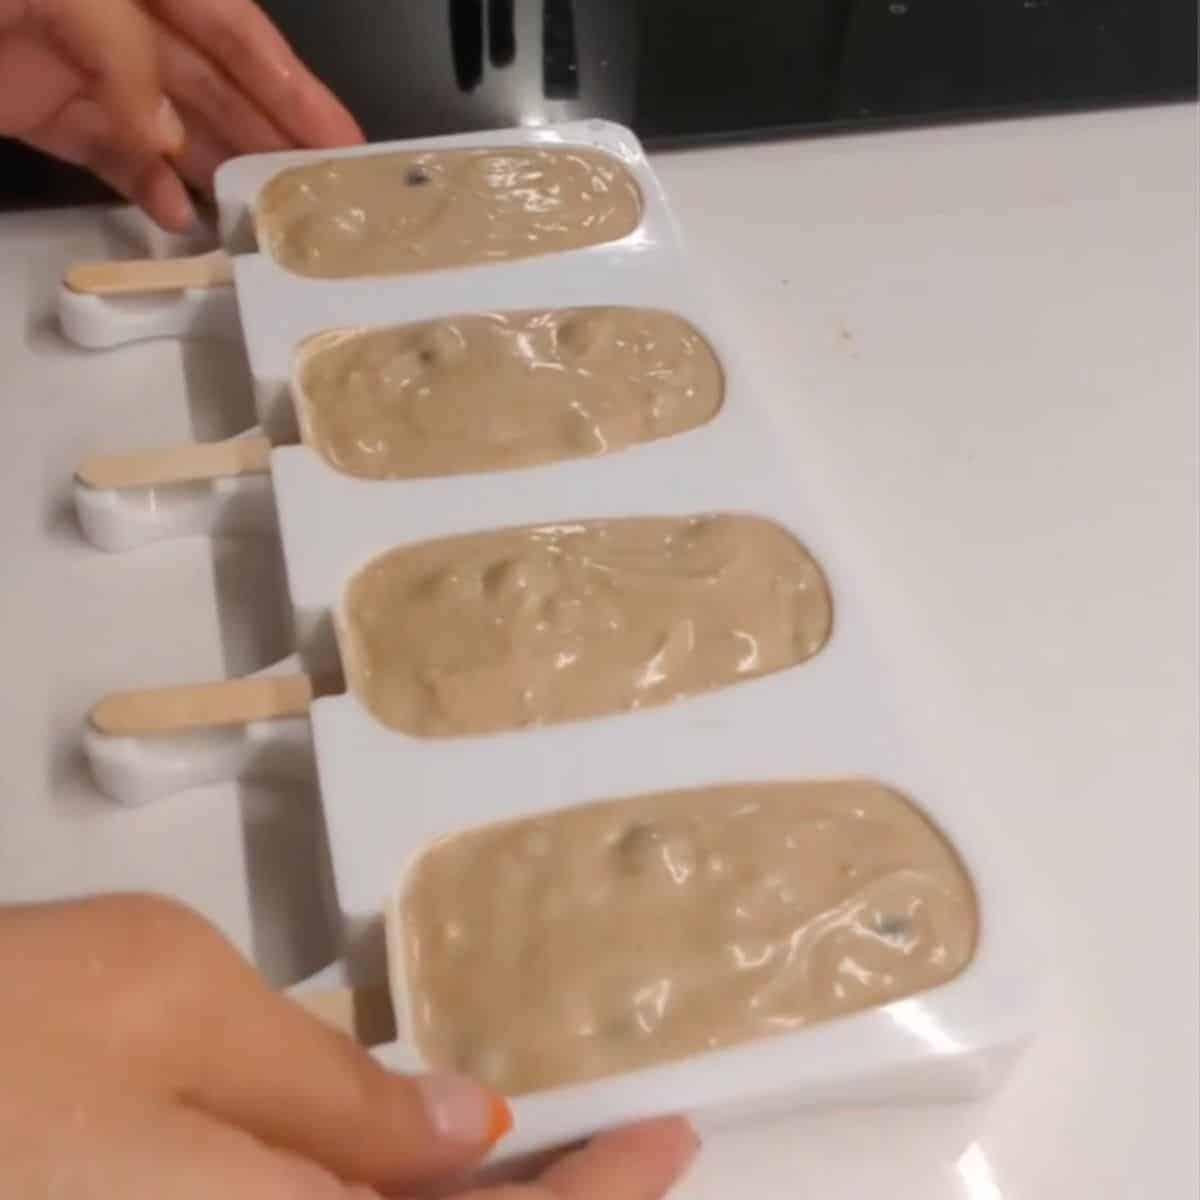 Freeze the boba ice cream in moulds overnight